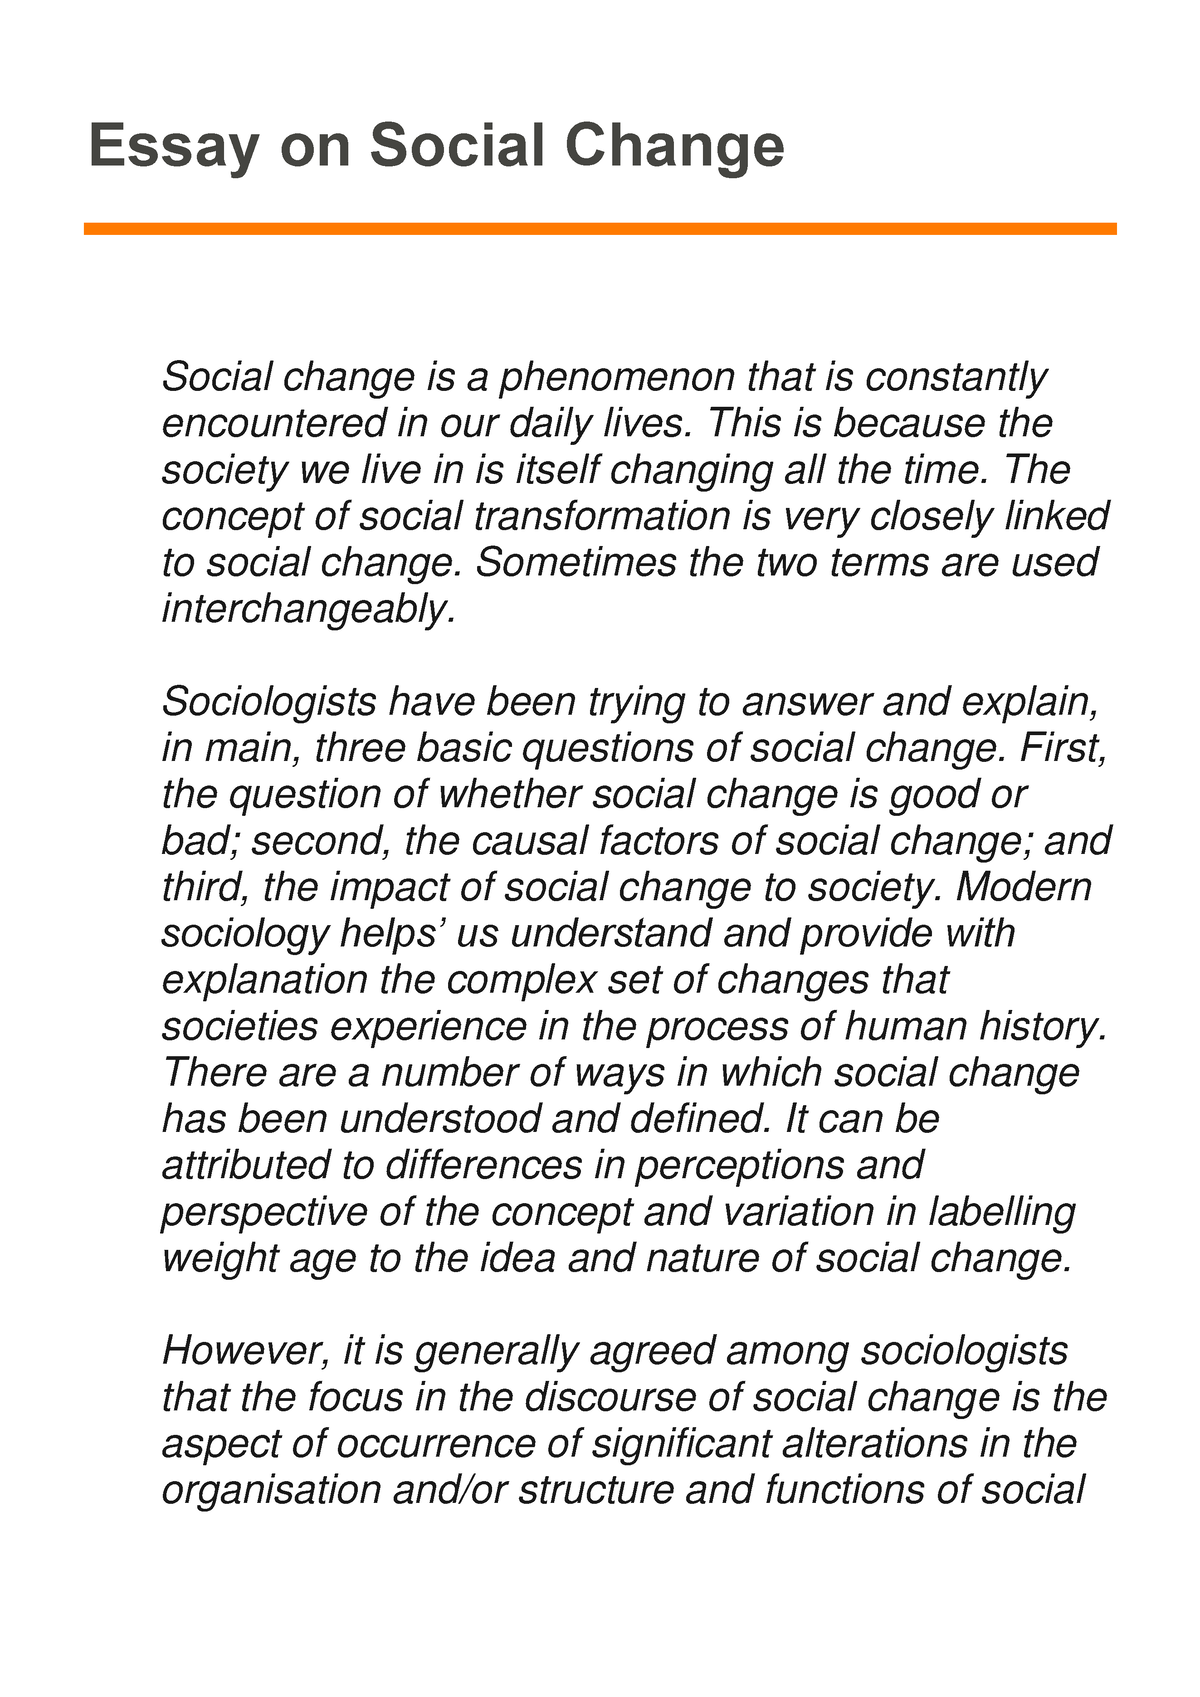 changing the society essay